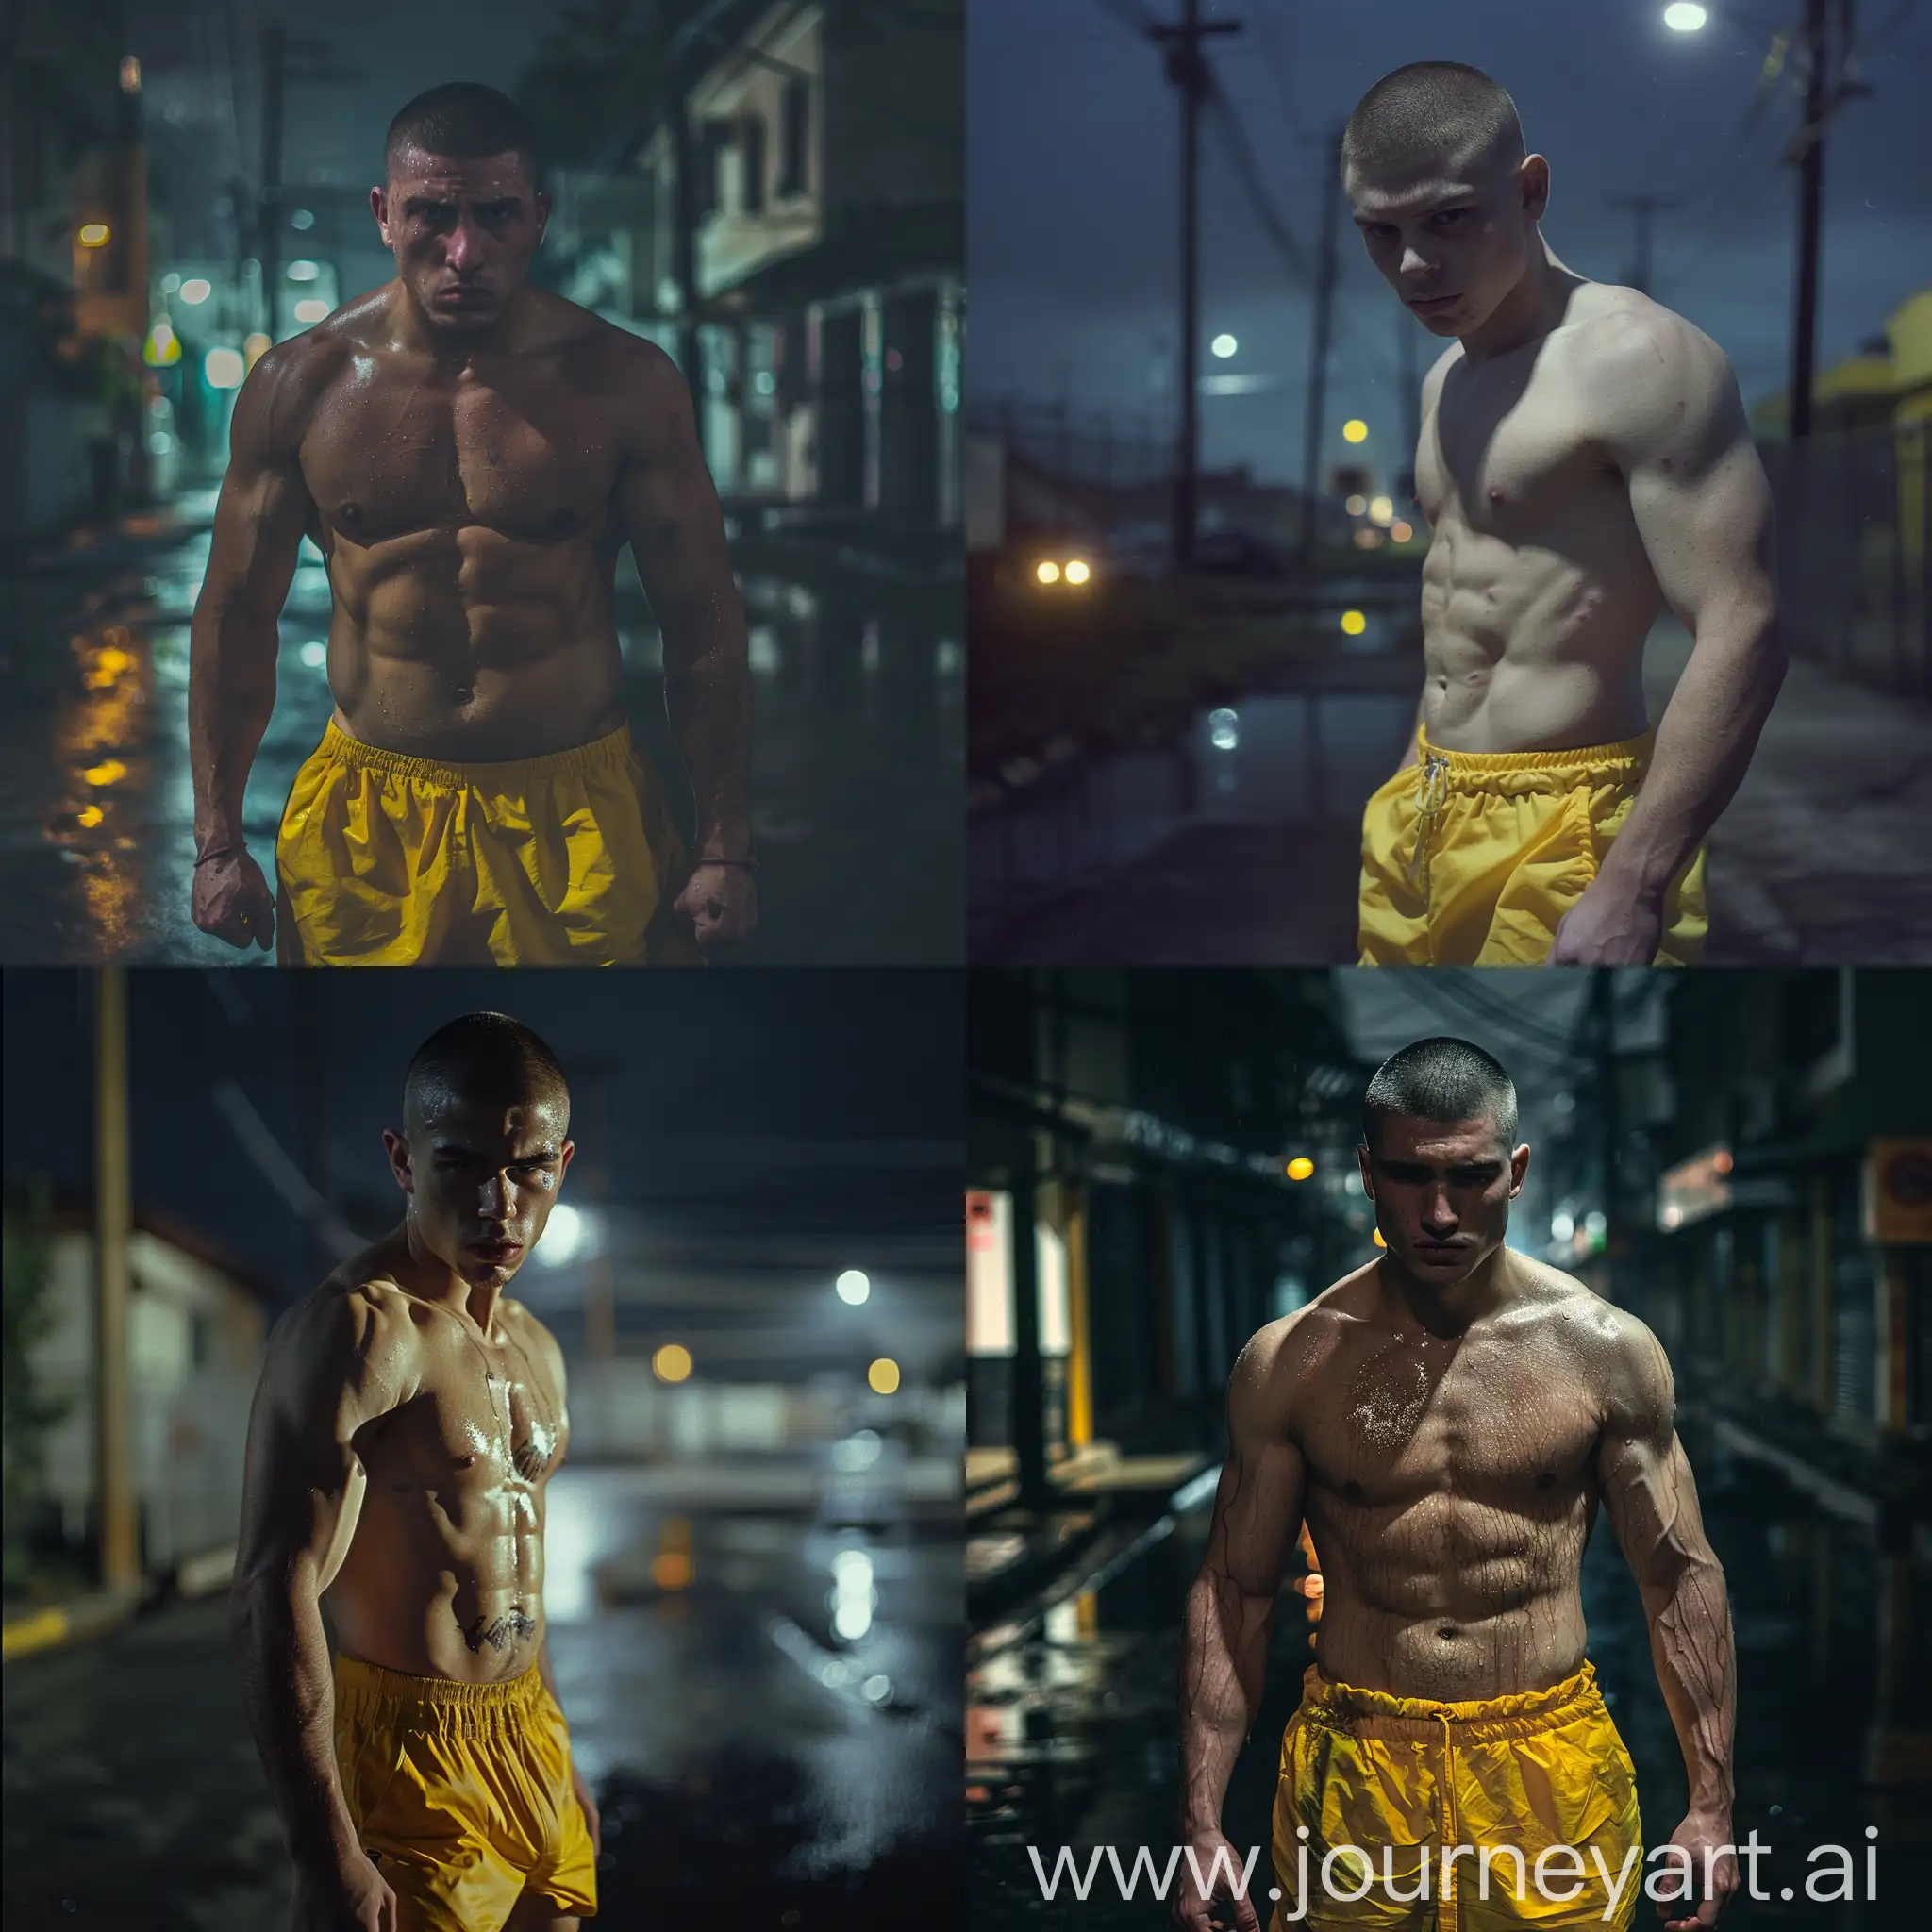 Angry-Man-in-Yellow-Shorts-on-Creepy-Midnight-Street